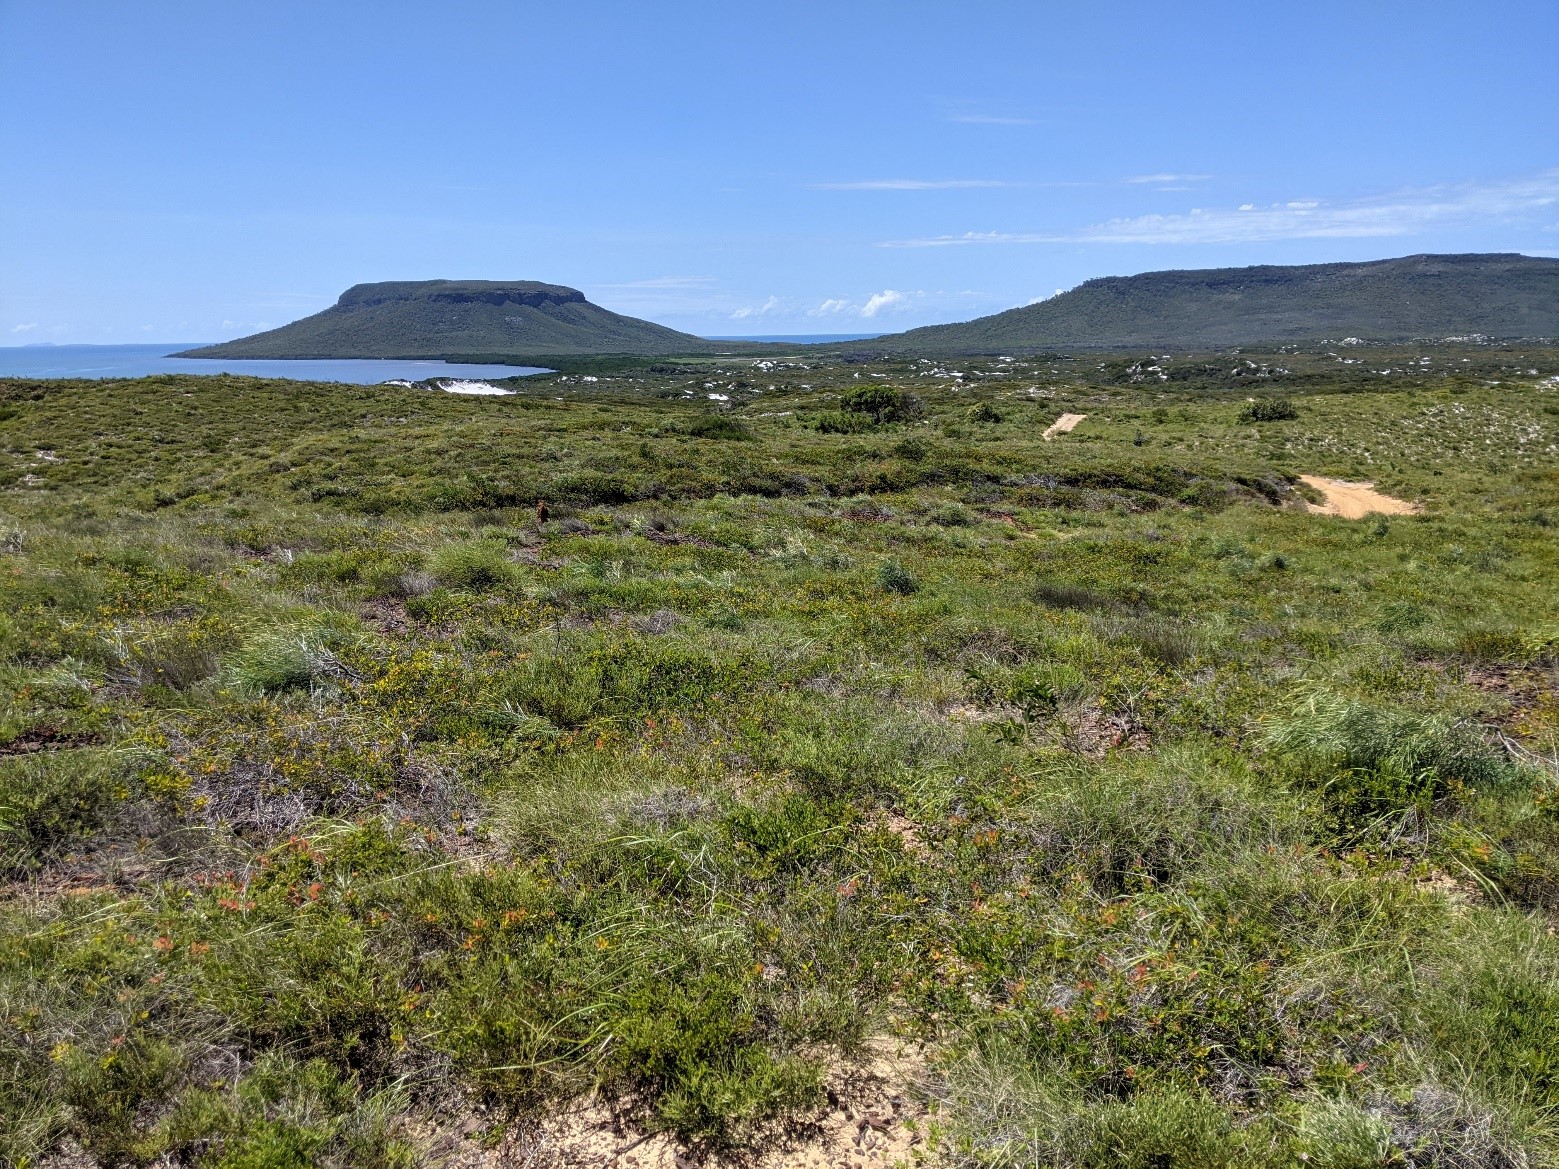 Native plants of the Cape Bedford area